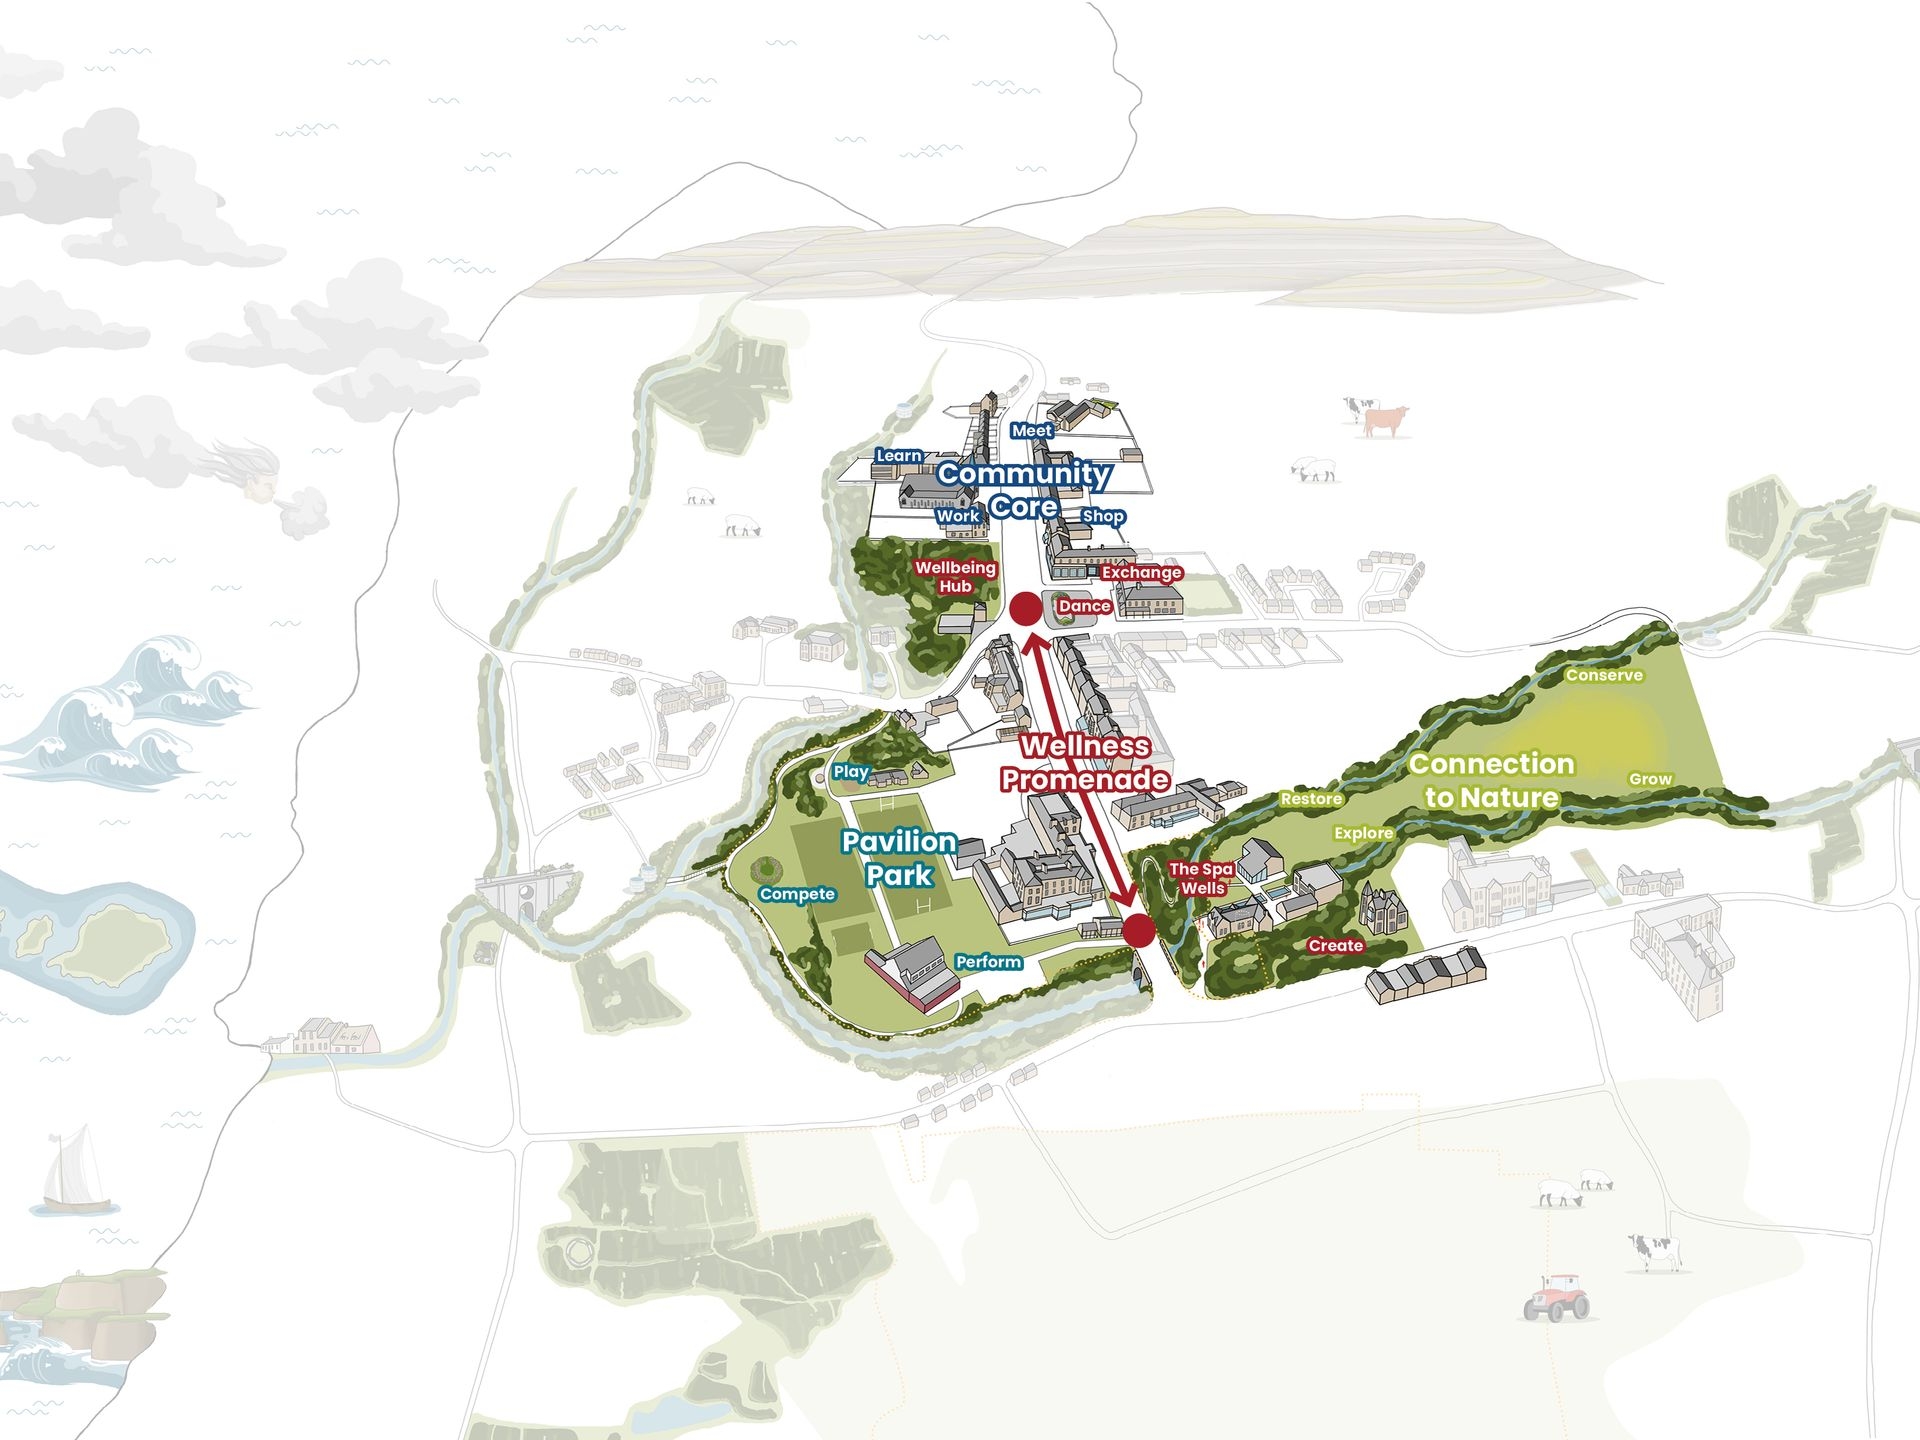 Natural and heritage sites including the spa, commonage and pavilion park should be connected and reinforced, extending though the town.